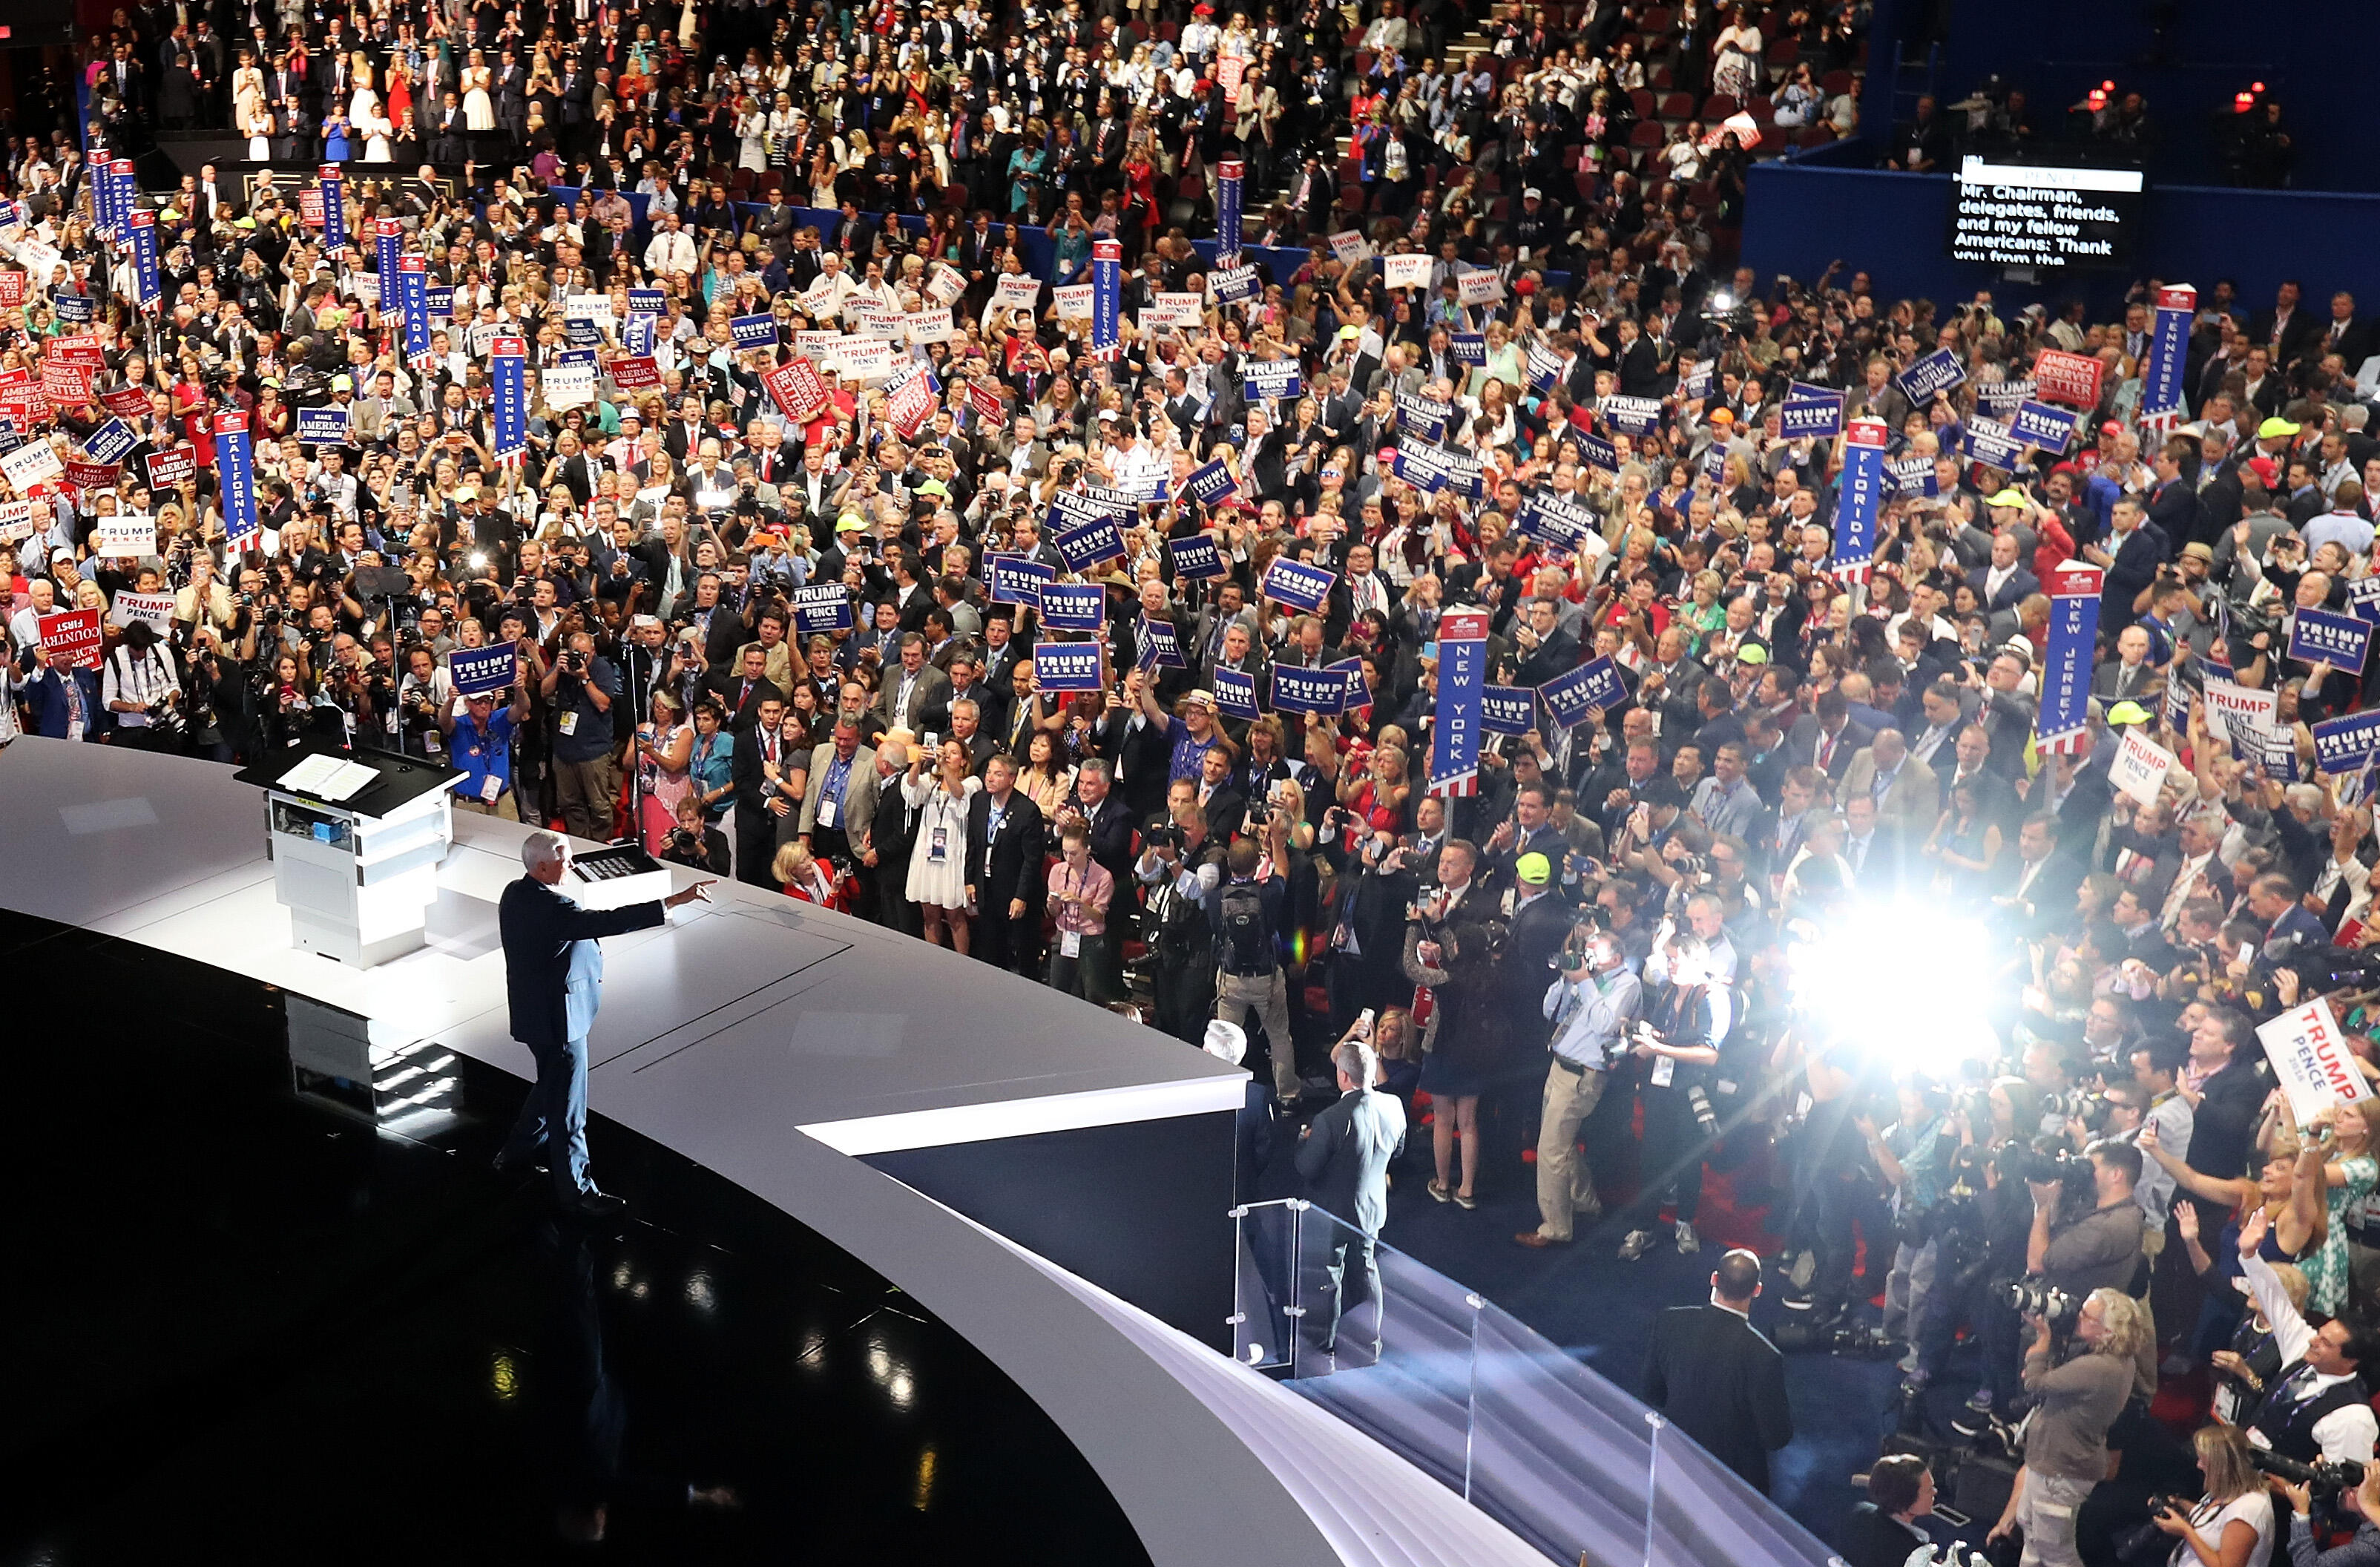 CLEVELAND, OH - JULY 20:  on the third day of the Republican National Convention on July 20, 2016 at the Quicken Loans Arena in Cleveland, Ohio. Republican presidential candidate Donald Trump received the number of votes needed to secure the party's nomination. An estimated 50,000 people are expected in Cleveland, including hundreds of protesters and members of the media. The four-day Republican National Convention kicked off on July 18. (Photo by Chip Somodevilla/Getty Images)